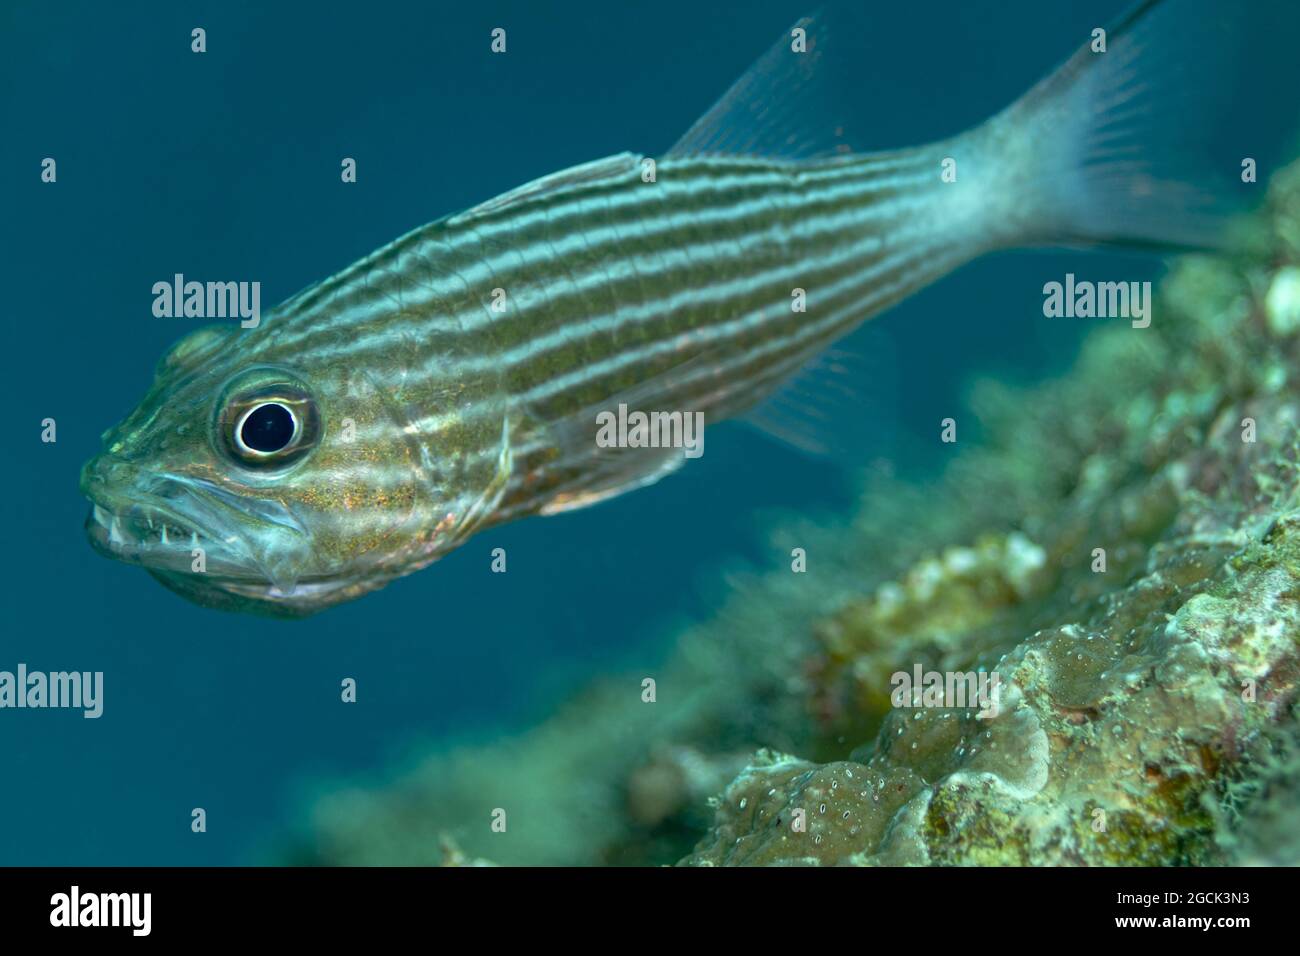 Closeup of tropical marine Cheilodipterus macrodon or Large toothed cardinalfish fish with striped body swimming underwater with rocky reefs Stock Photo